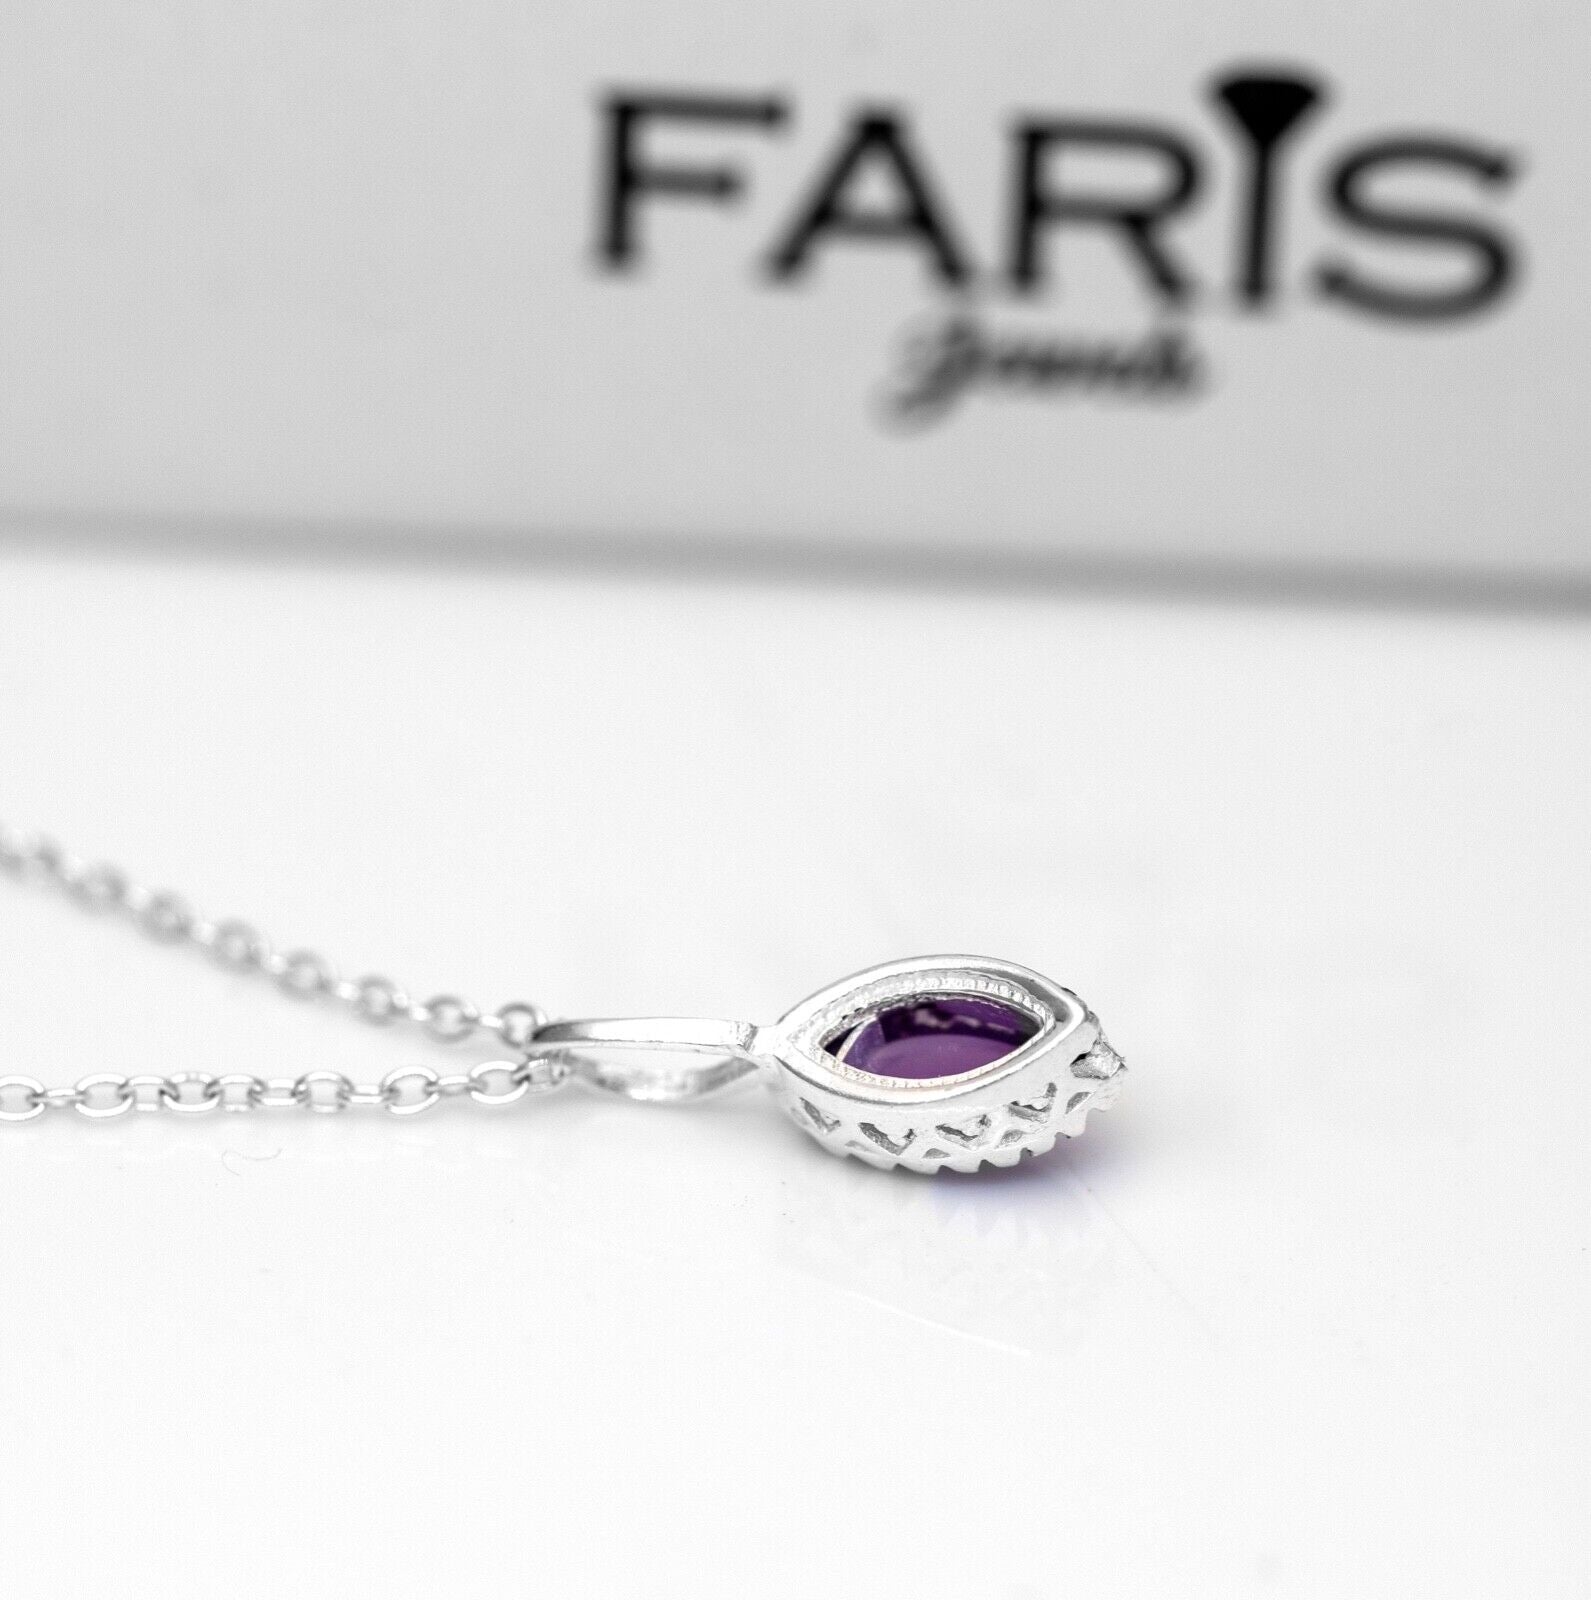 Marquise Purple Amethyst Sterling Silver 925 Pendant Necklace Ladies Jewellery